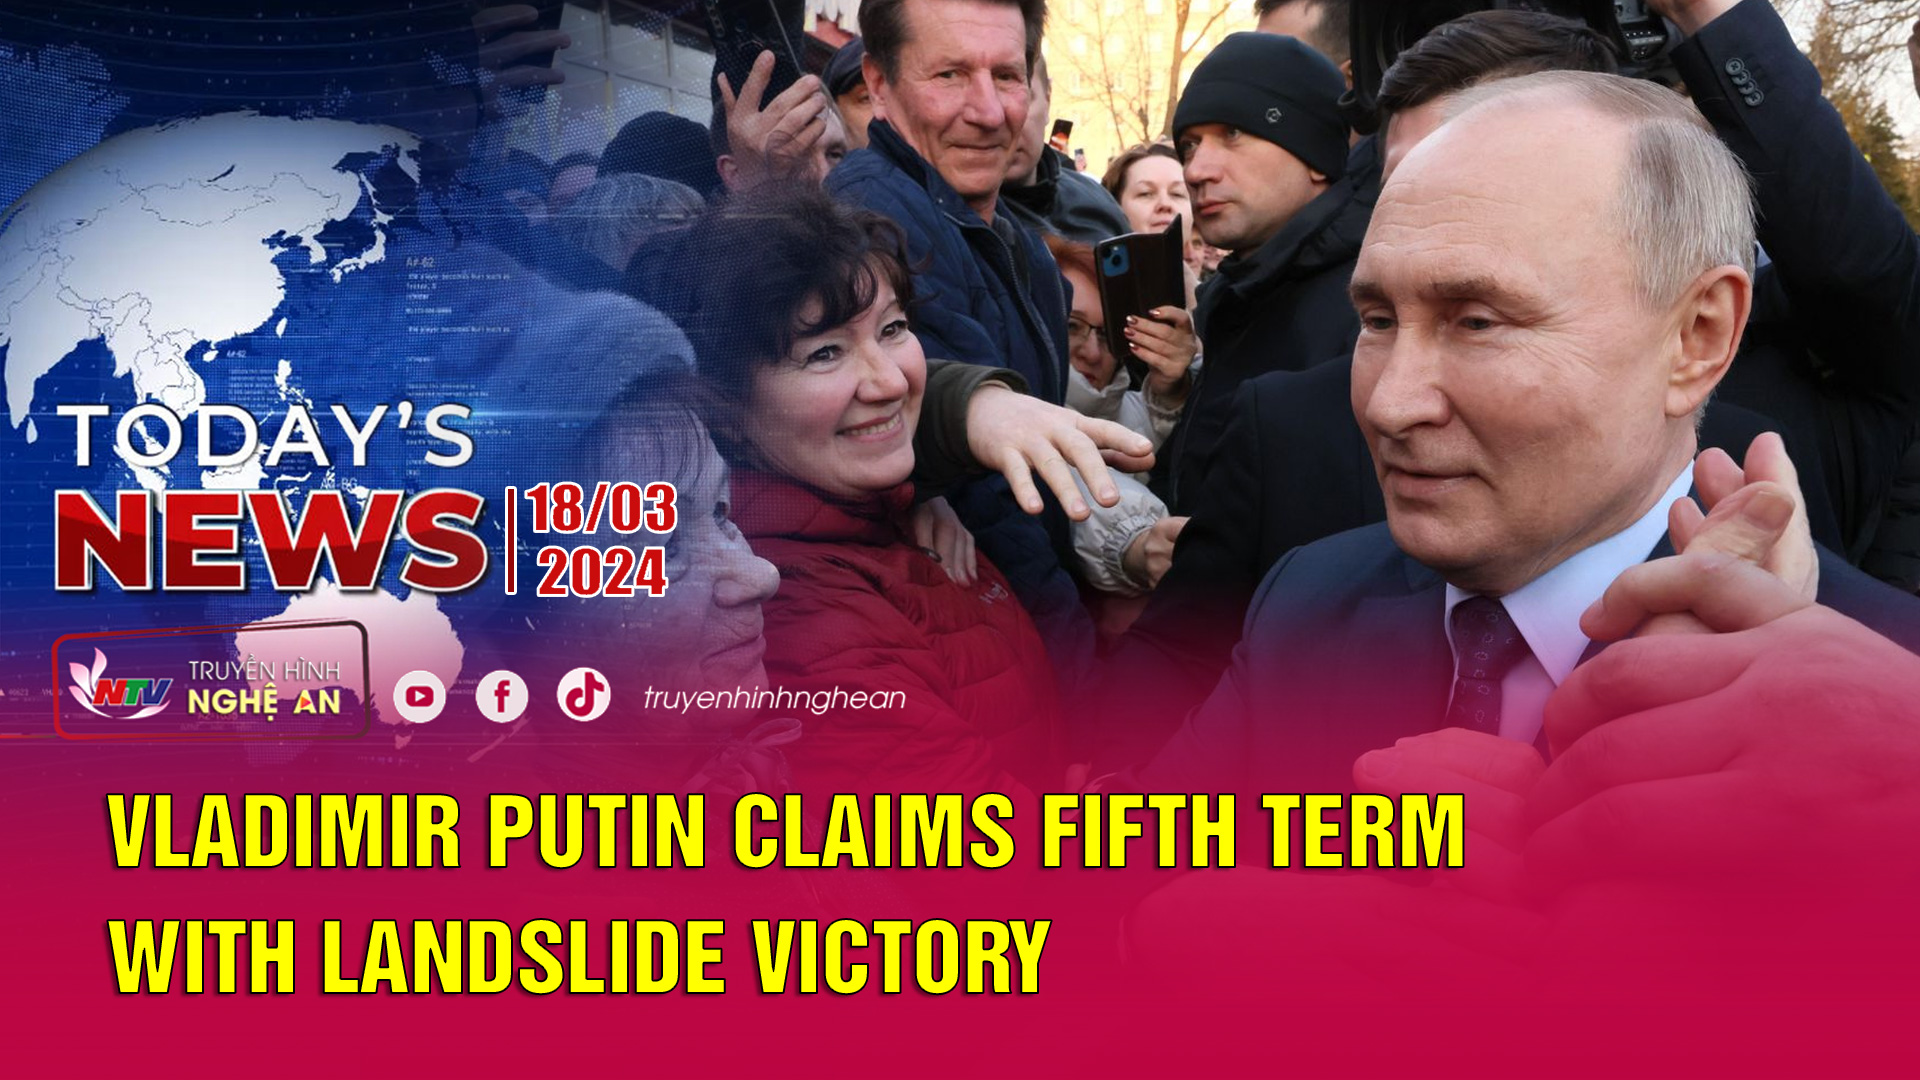 Today's News 18/03/2024: Vladimir Putin claims fifth term with landslide victory